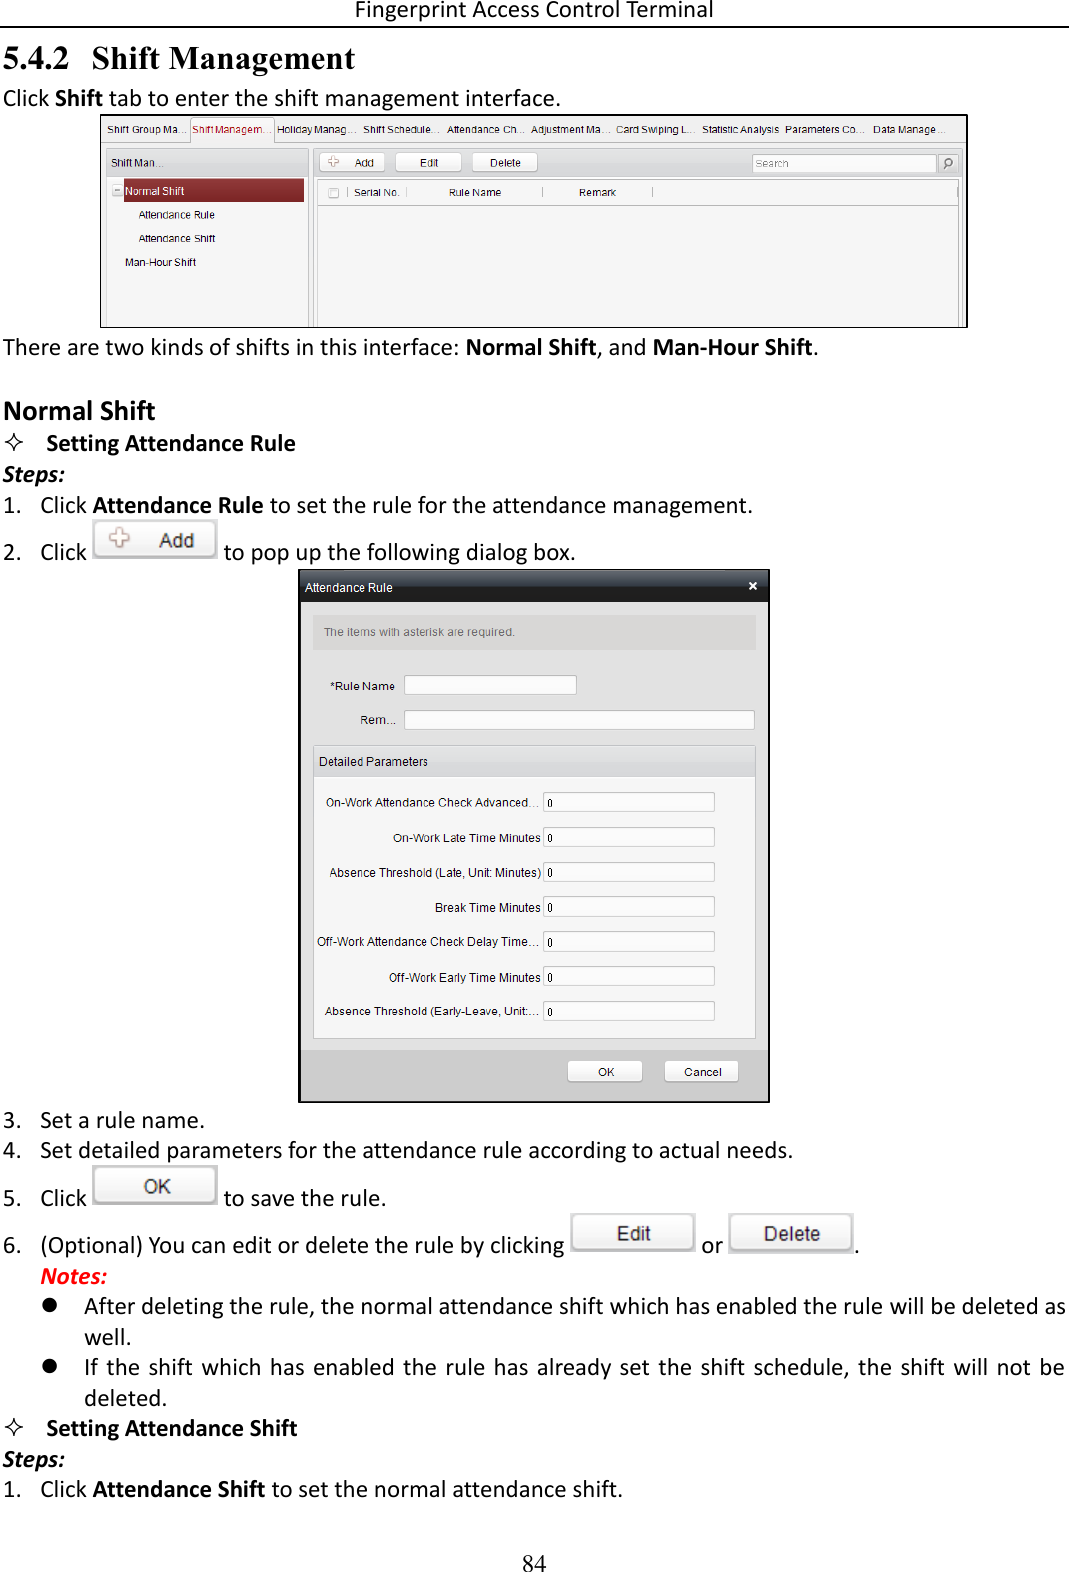 Fingerprint Access Control Terminal 84  5.4.2 Shift Management Click Shift tab to enter the shift management interface.   There are two kinds of shifts in this interface: Normal Shift, and Man-Hour Shift.   Normal Shift  Setting Attendance Rule Steps: 1. Click Attendance Rule to set the rule for the attendance management. 2. Click   to pop up the following dialog box.   3. Set a rule name.  4. Set detailed parameters for the attendance rule according to actual needs.  5. Click   to save the rule. 6. (Optional) You can edit or delete the rule by clicking   or  .  Notes:   After deleting the rule, the normal attendance shift which has enabled the rule will be deleted as well.  If the  shift  which has  enabled the rule has already set the shift  schedule, the  shift will not be deleted.  Setting Attendance Shift Steps: 1. Click Attendance Shift to set the normal attendance shift. 